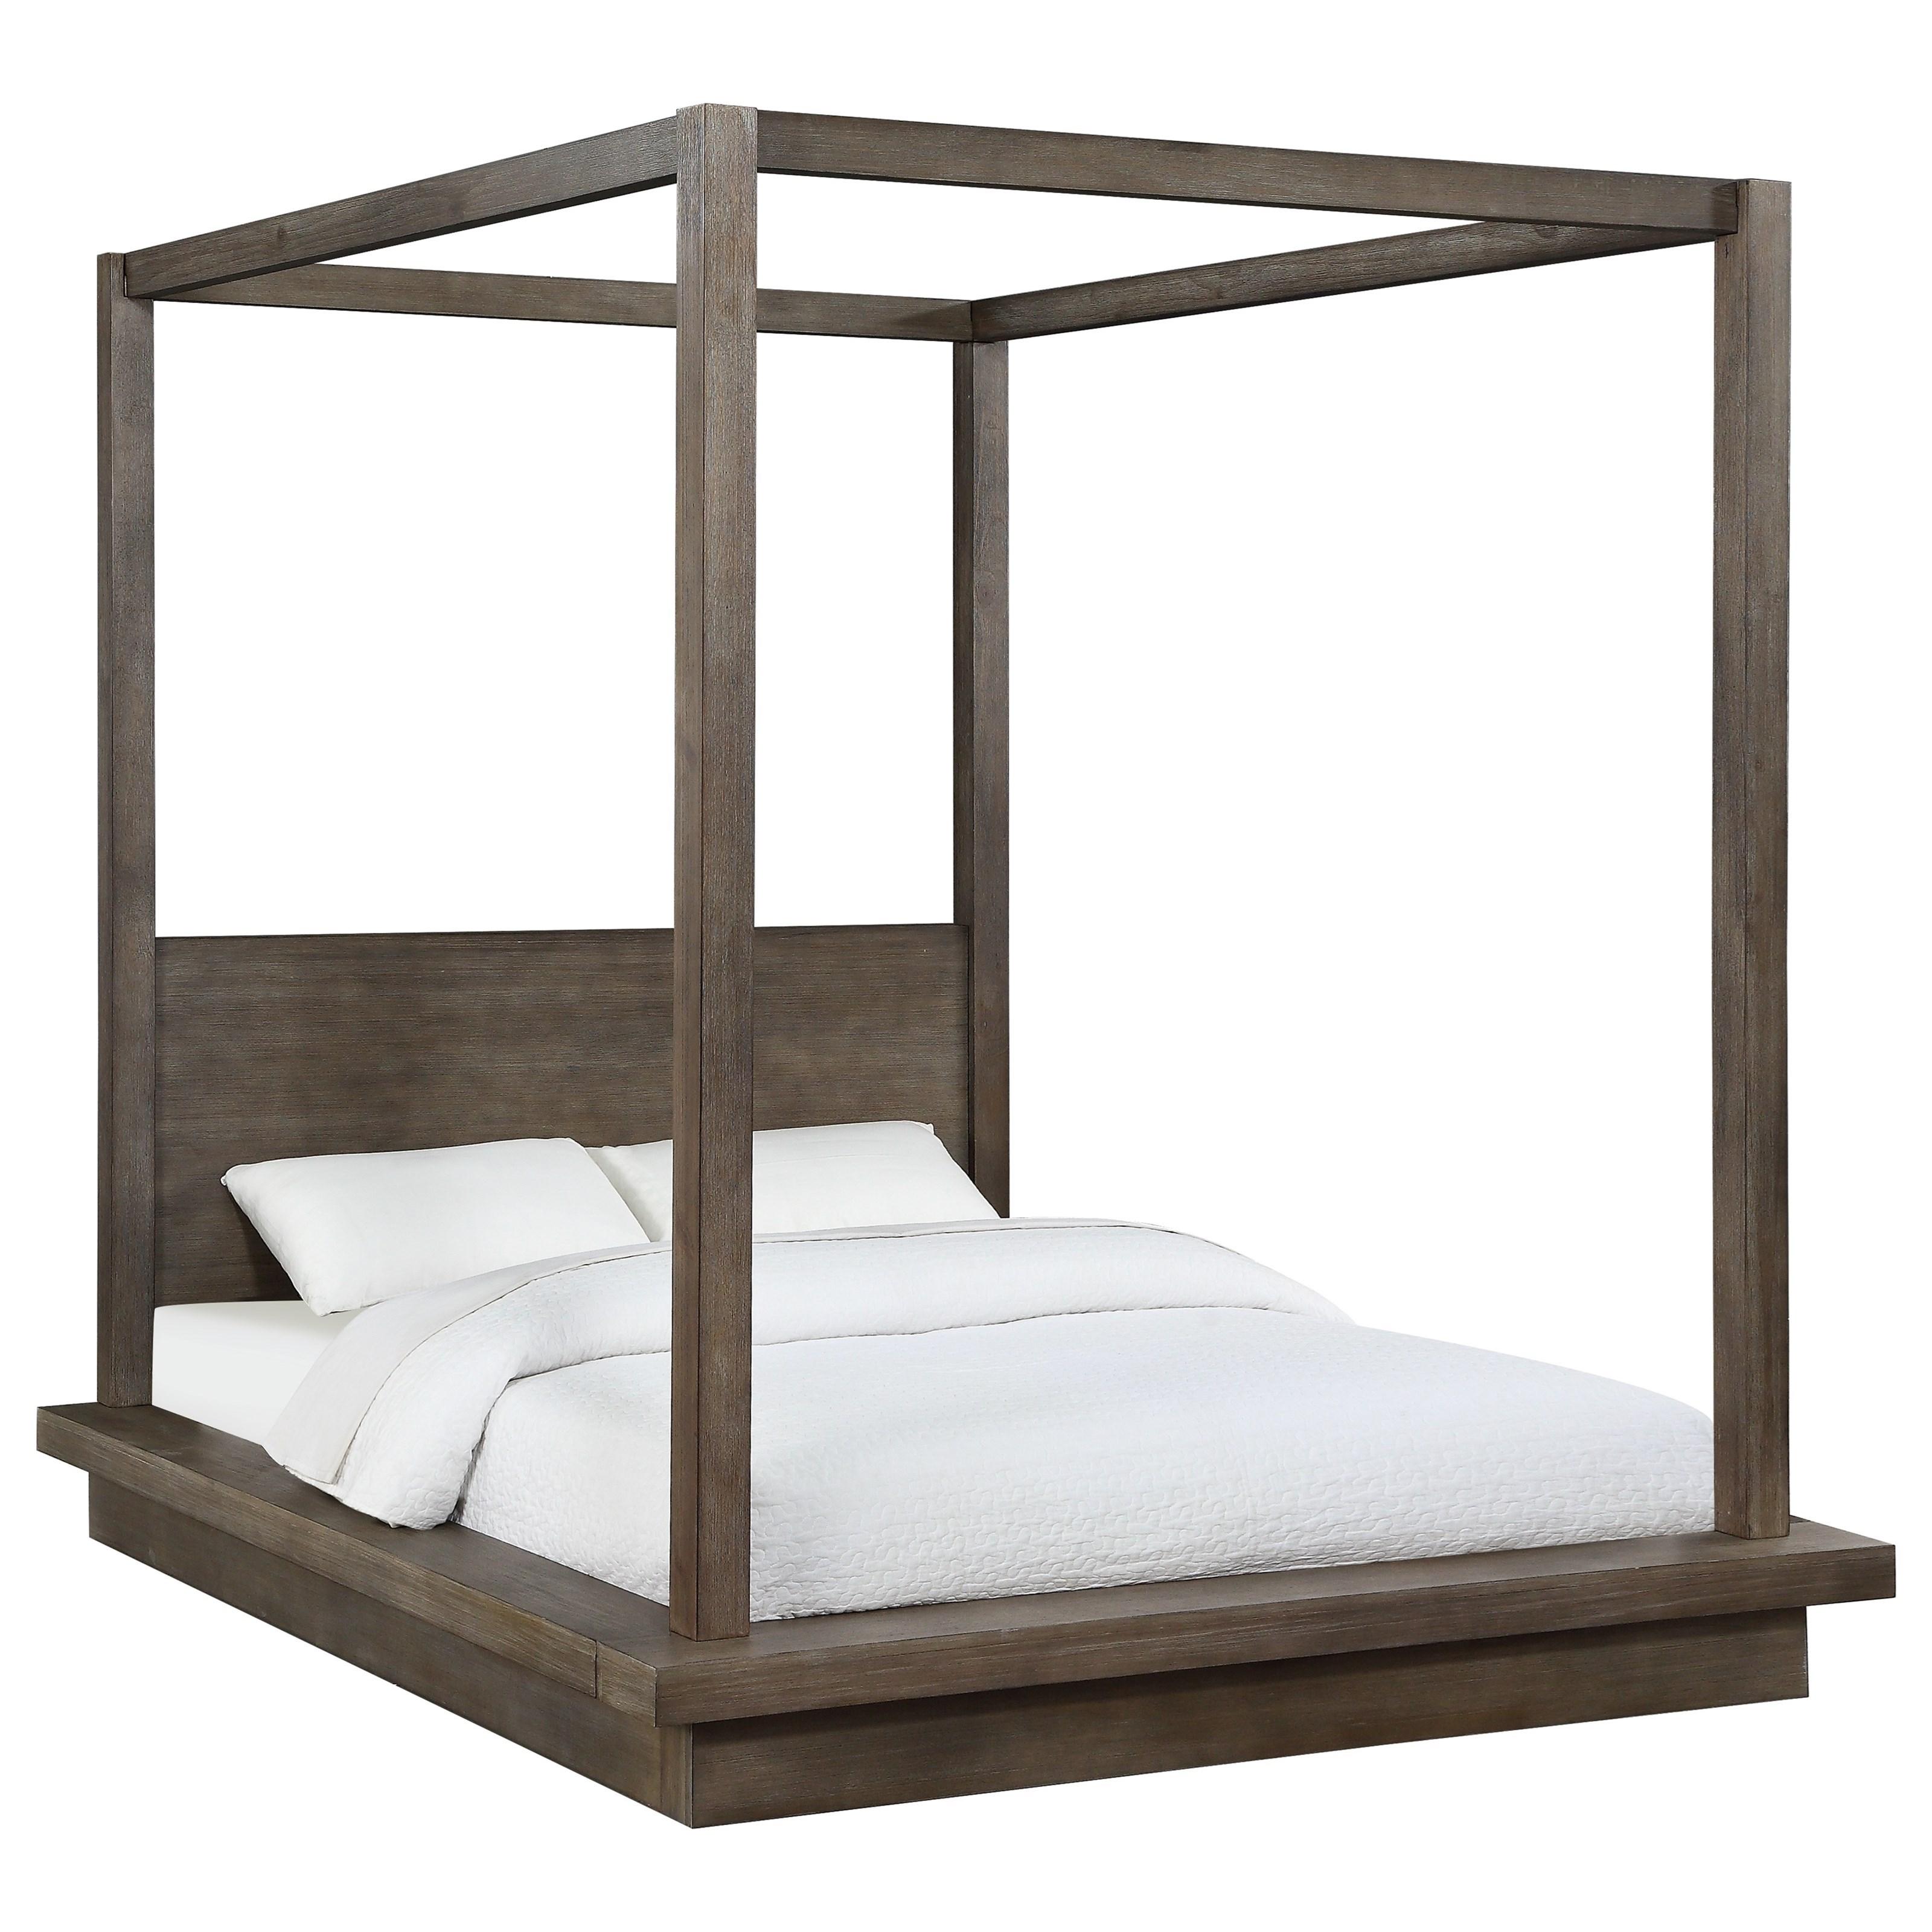 Modus Furniture MELBOURNE CANOPY Canopy Bed